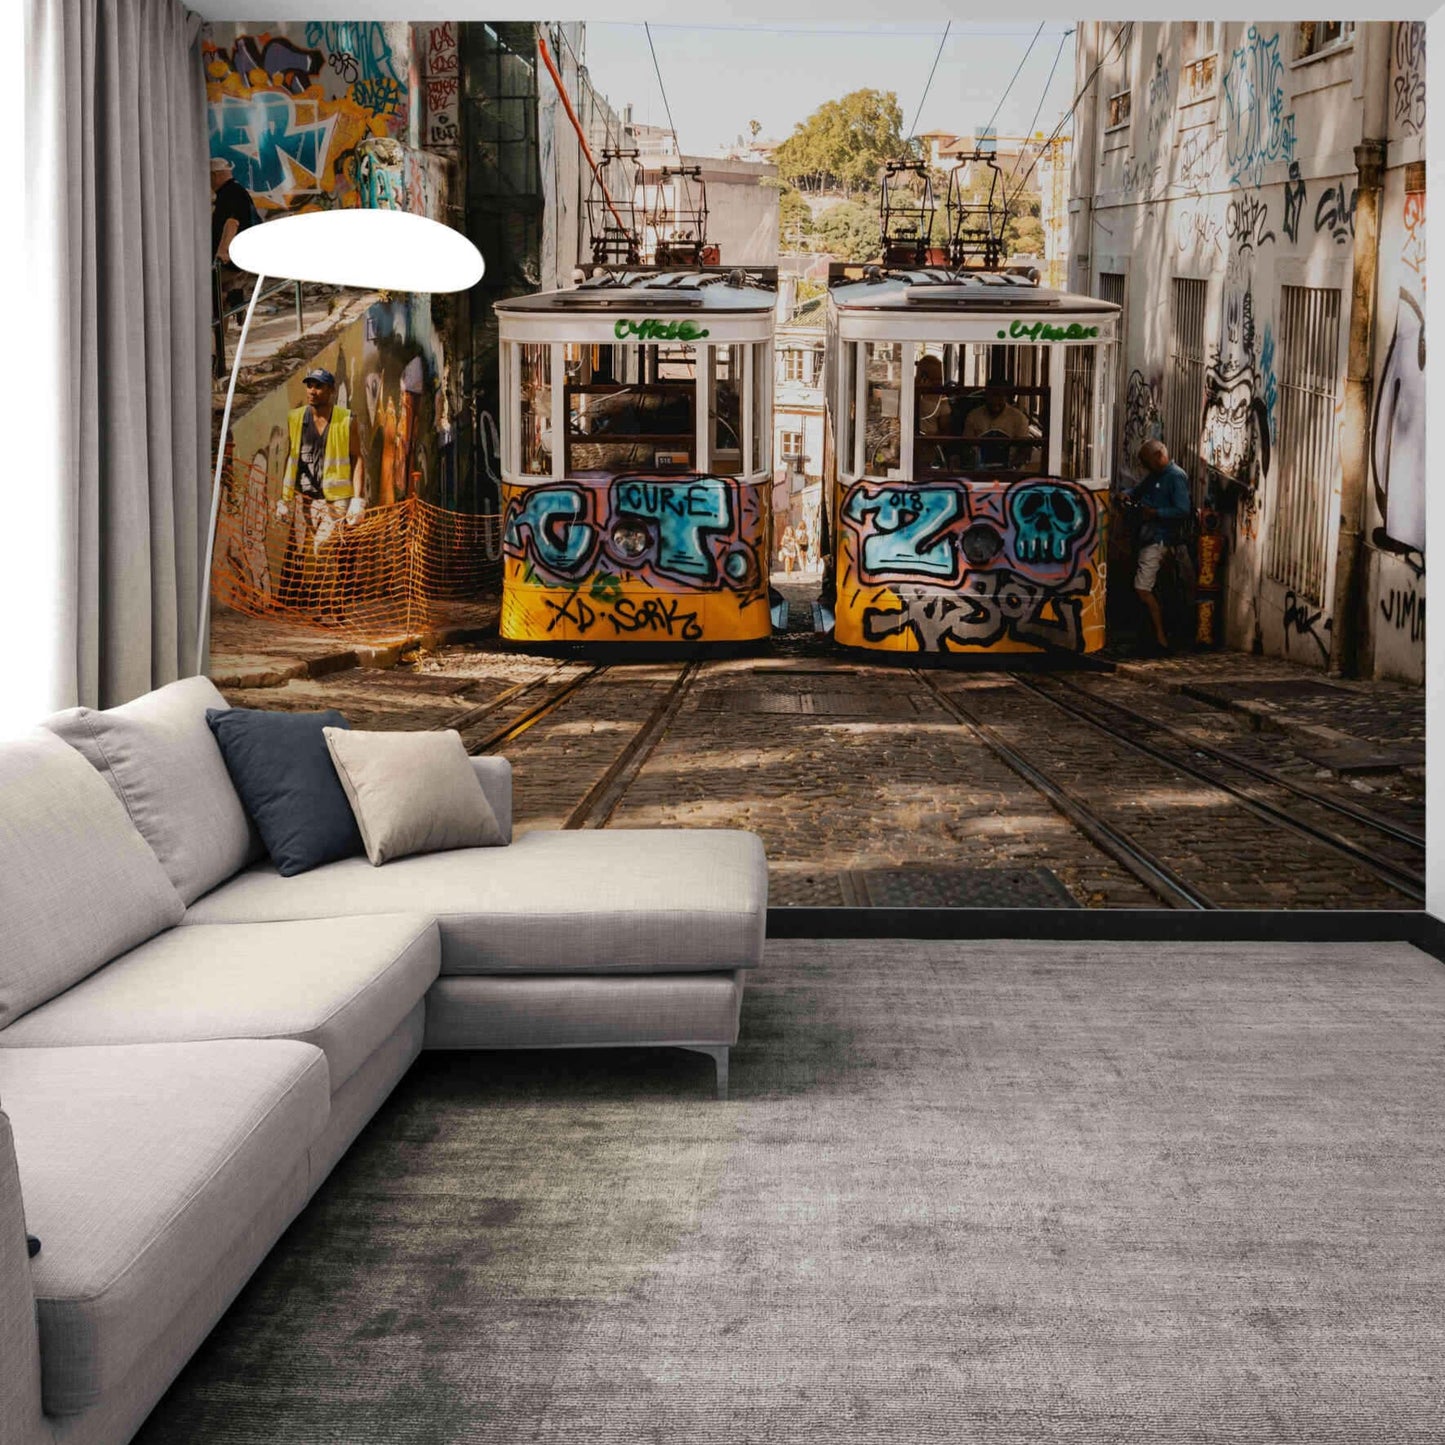 Colorful graffiti on street vehicles mural wallpaper enhancing room ambiance.